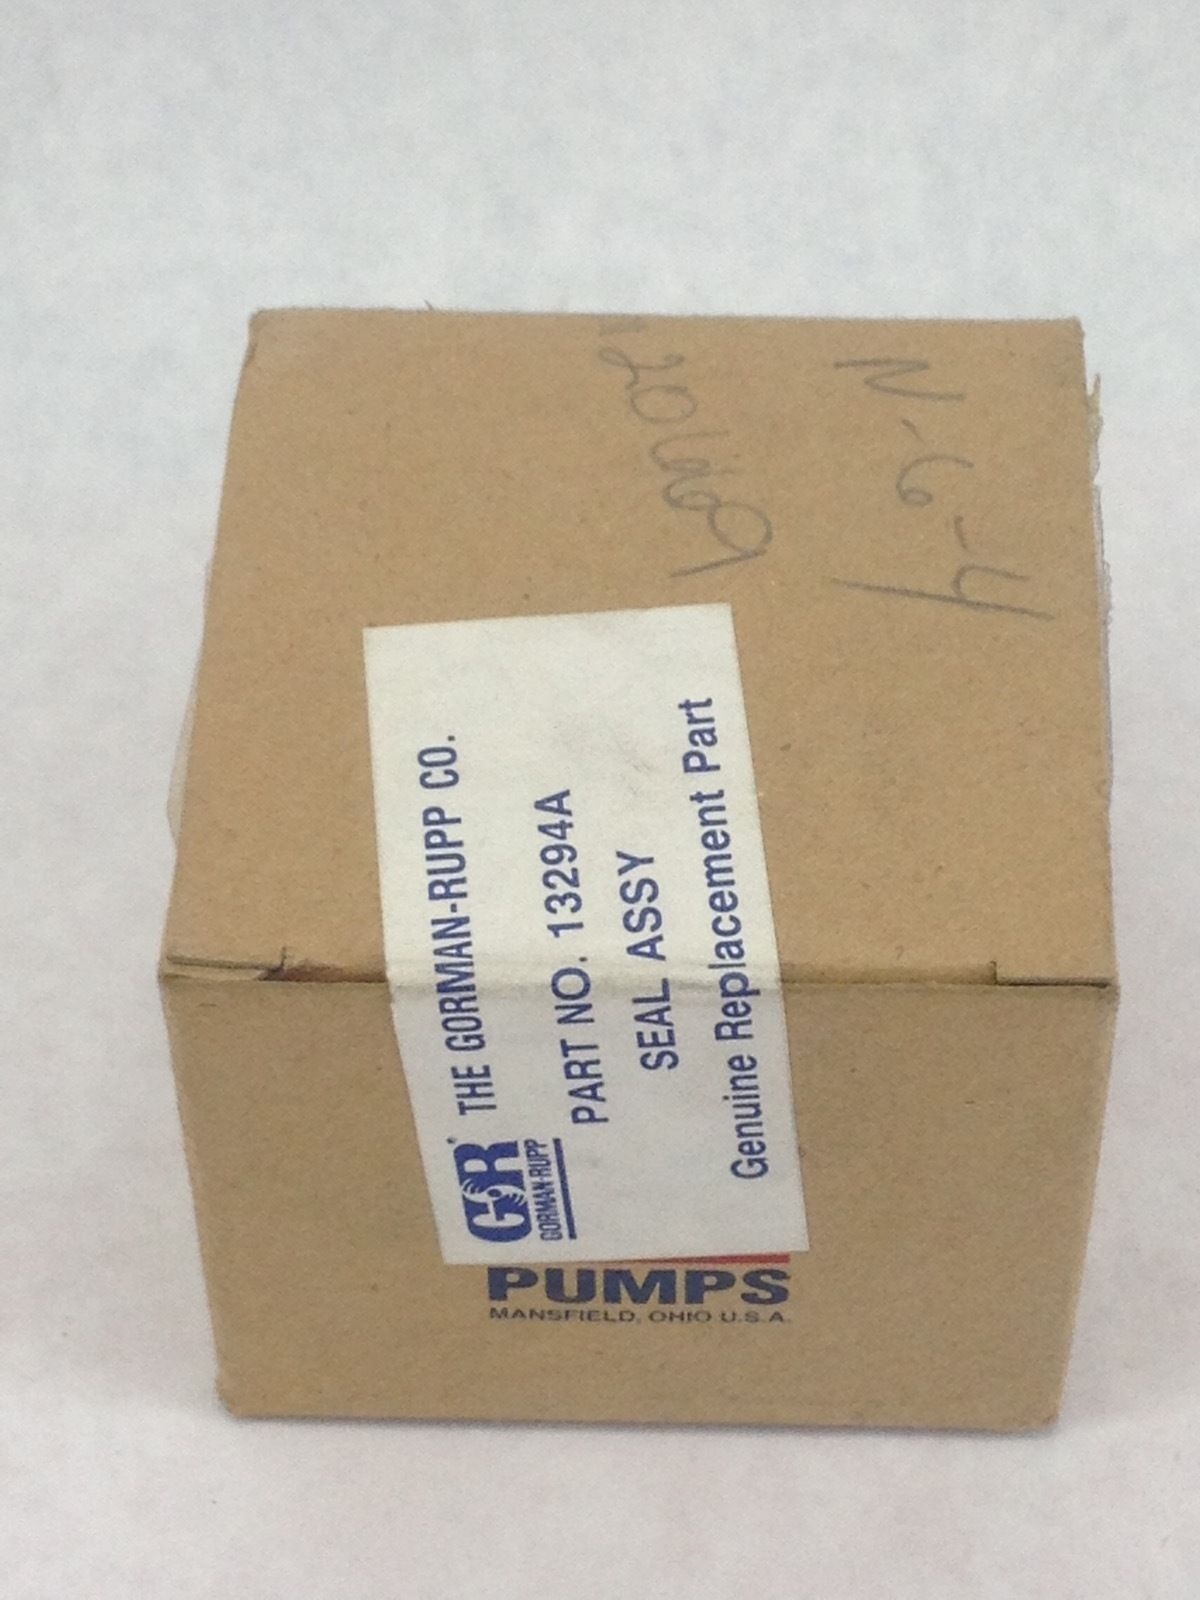 NEW FACTORY SEALED! GENUINE GORMAN-RUPP 13294A SEAL ASSEMBLY FAST SHIP!!! (A103) 1